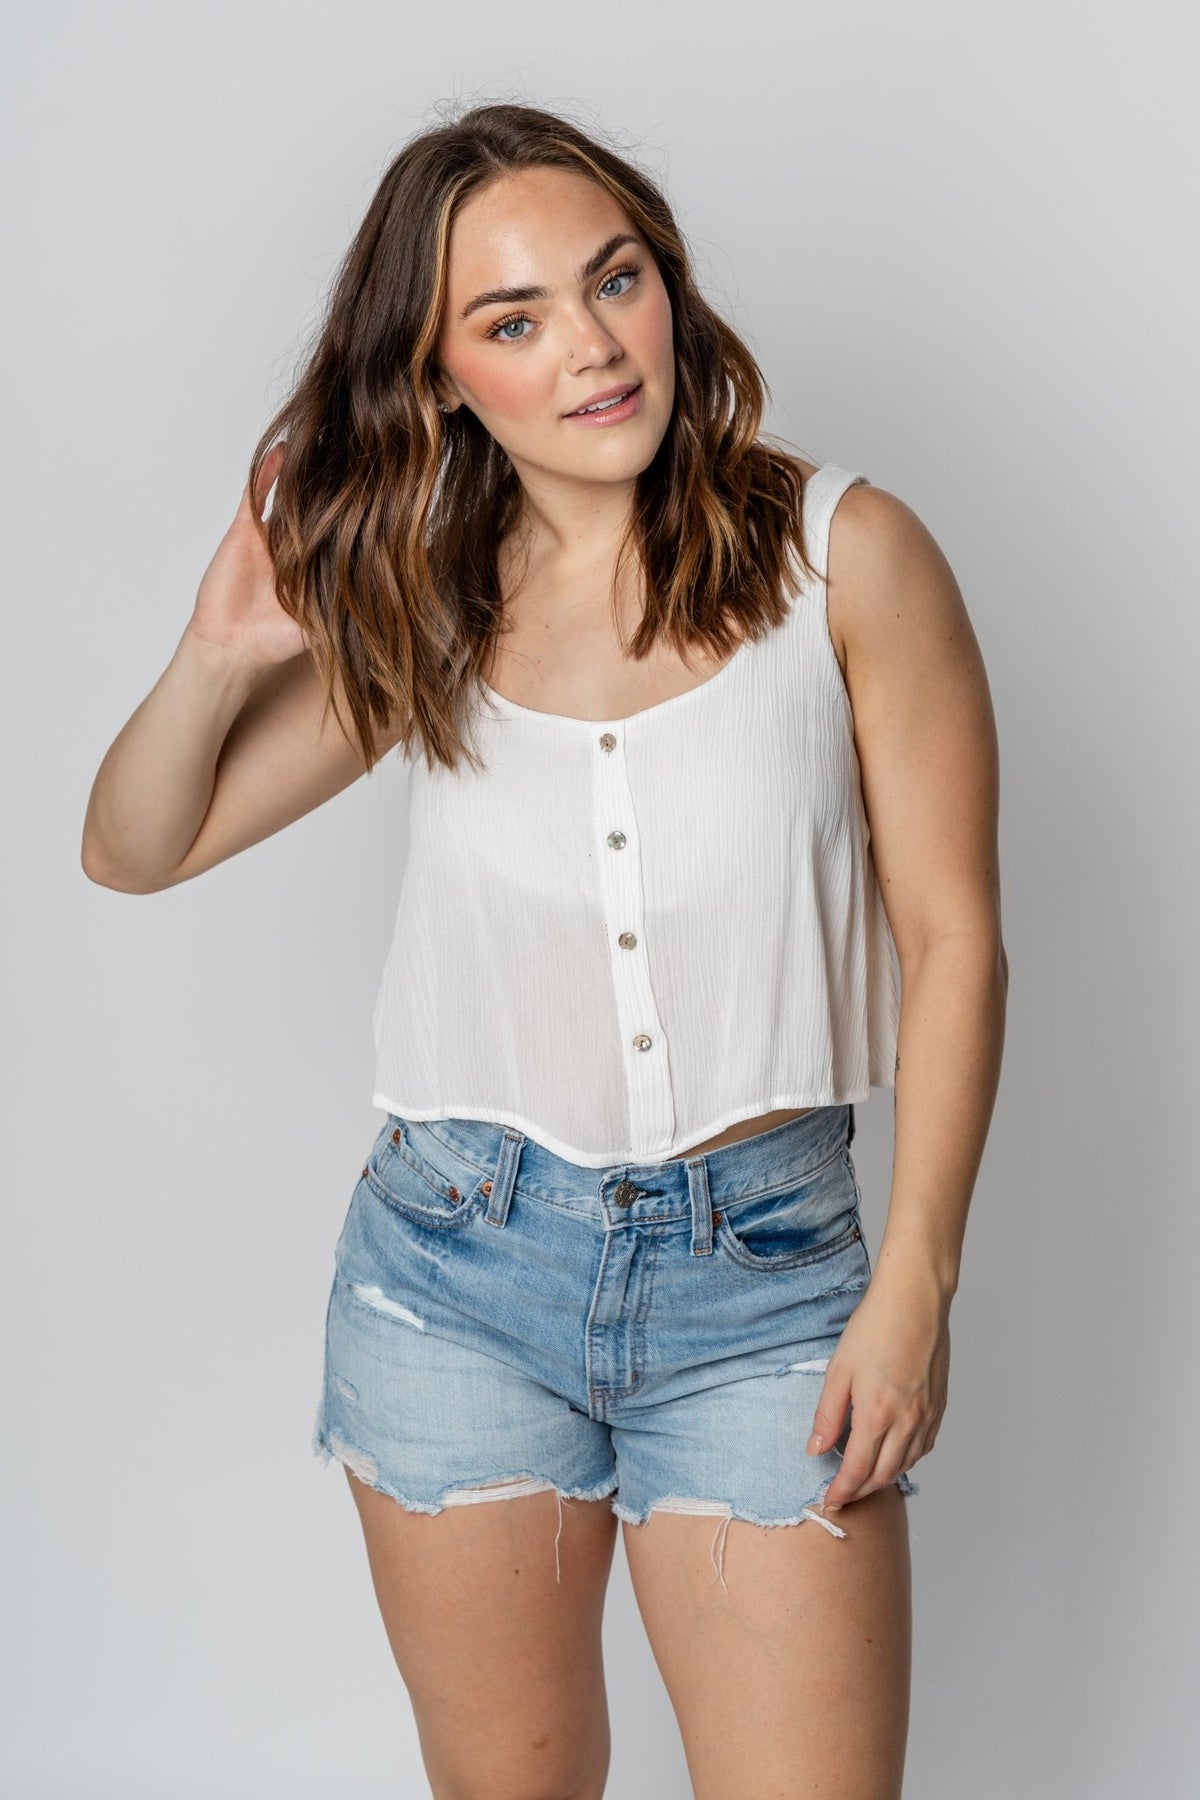 Cropped button tank top ivory - Cute Top - Trendy Tank Tops at Lush Fashion Lounge Boutique in Oklahoma City